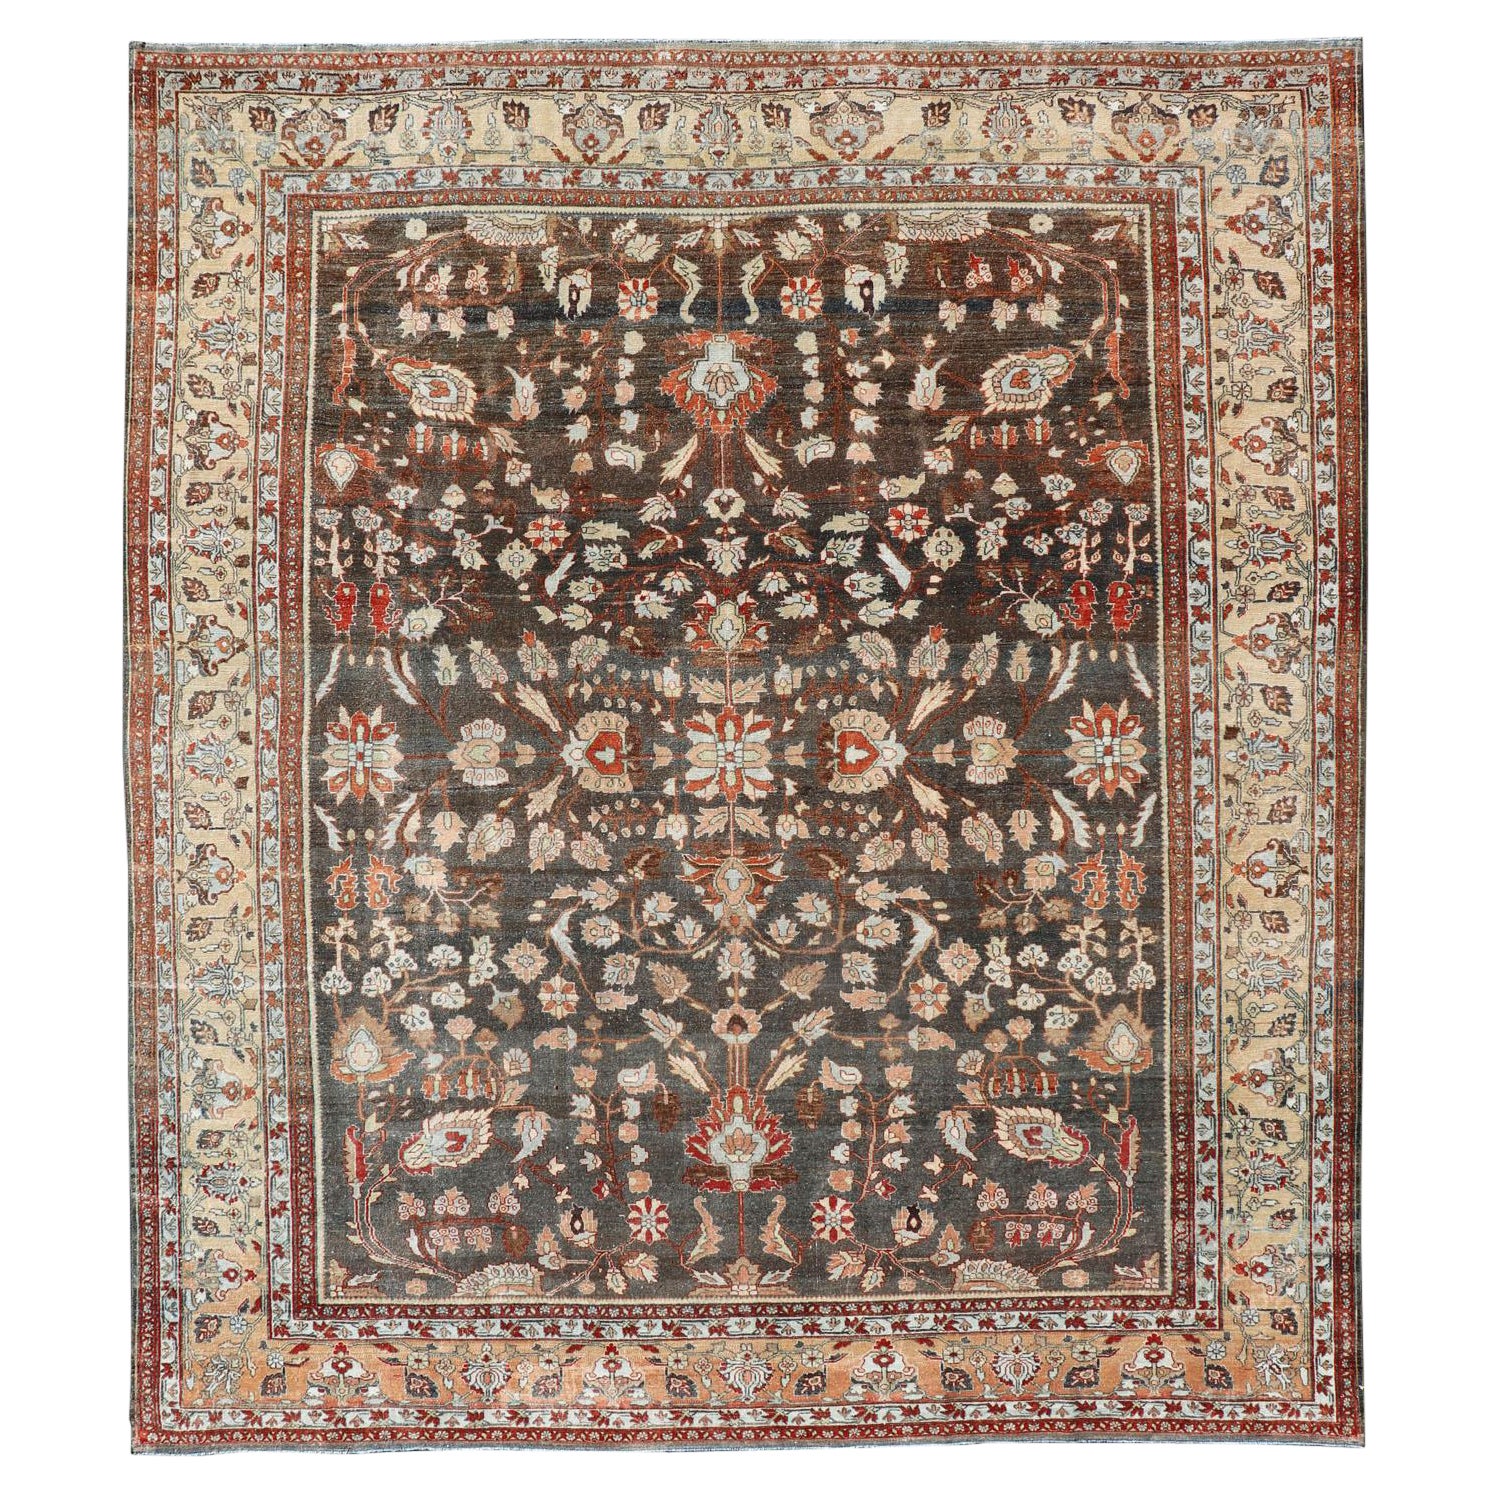 Square Antique Persian Malayer Rug with a Brown Field and Stylized Floral Design